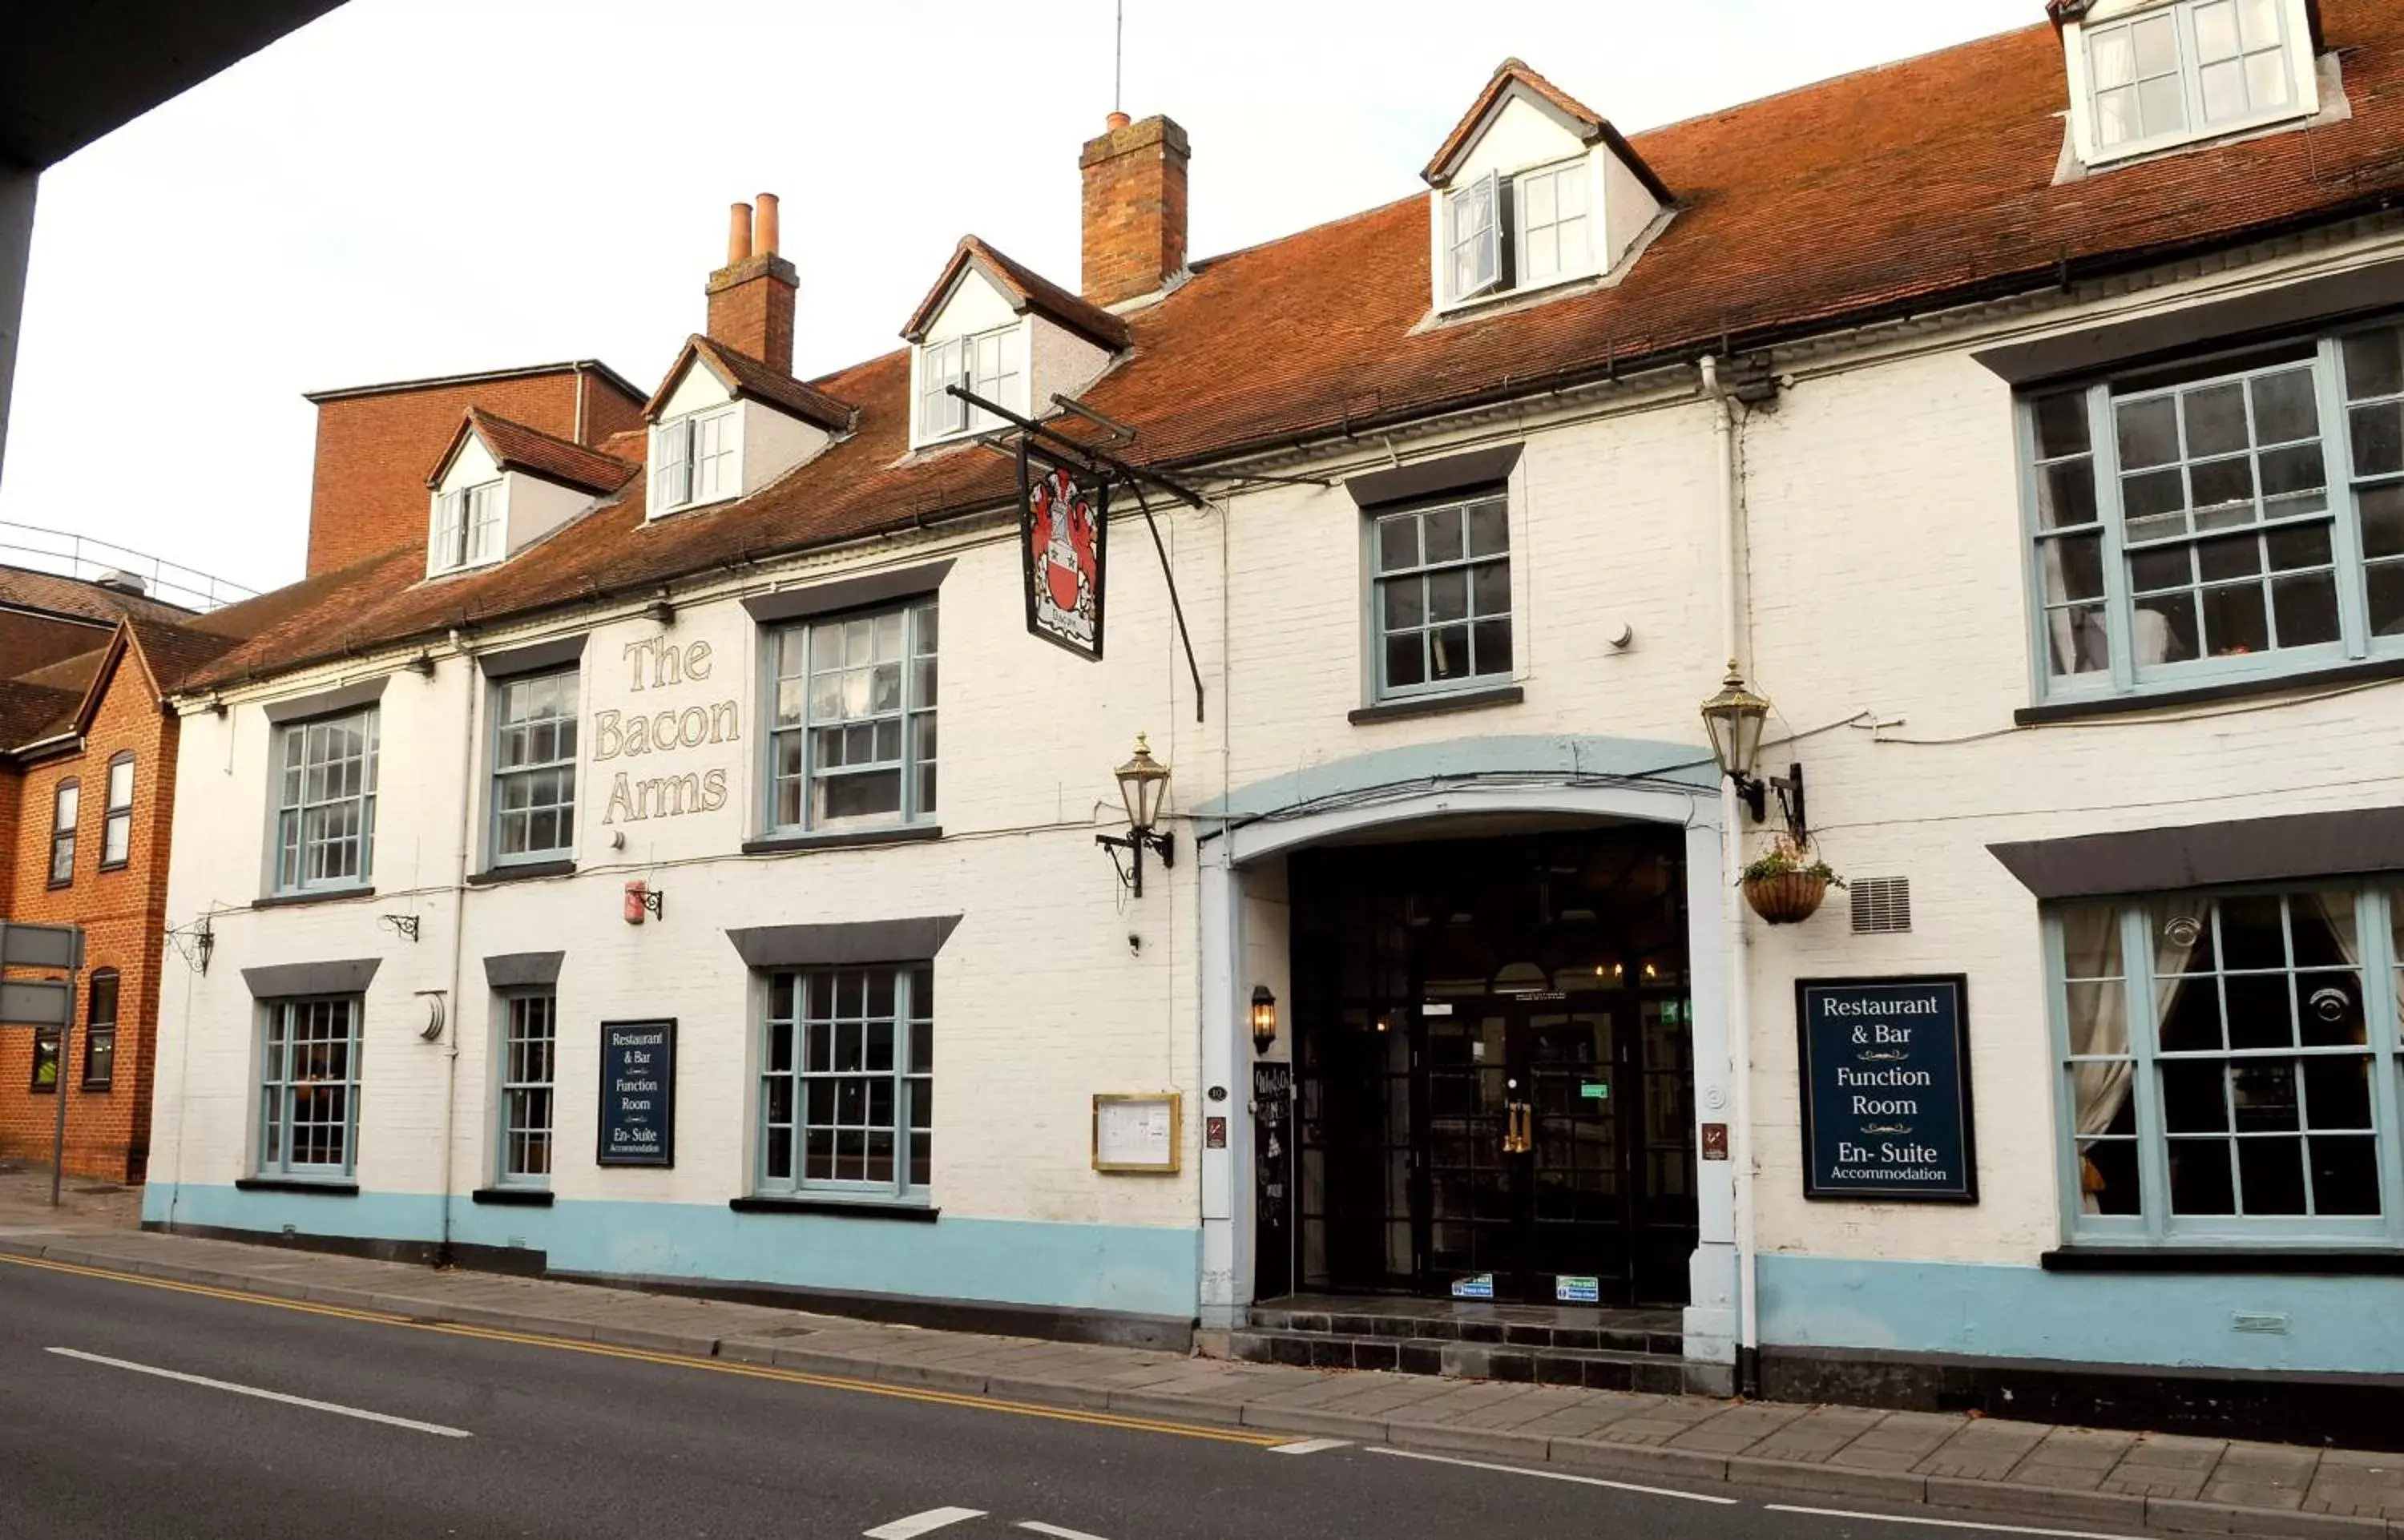 Property Building in Bacon Arms, Newbury